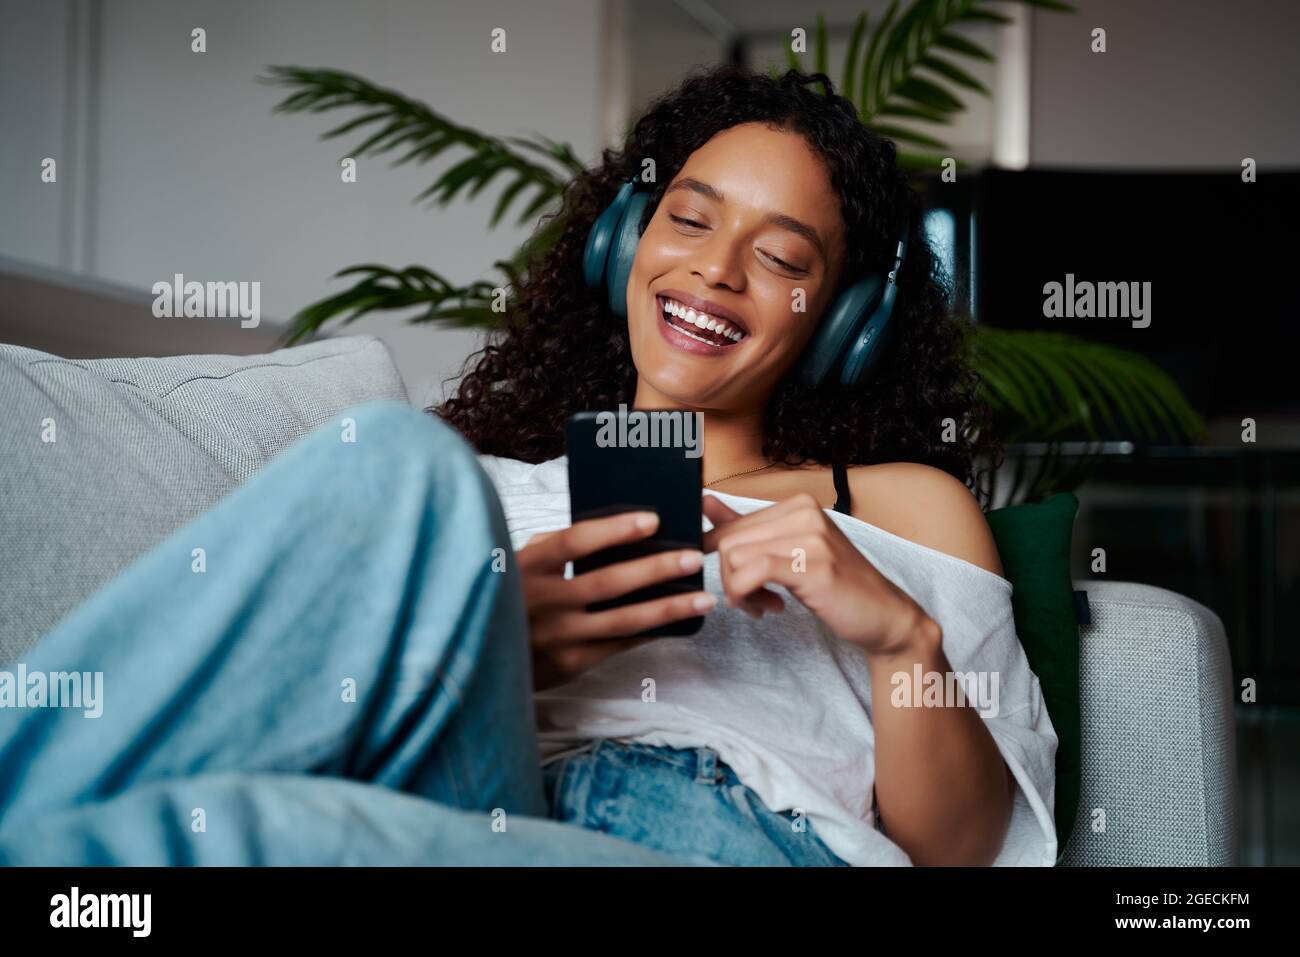 Mixed race female teen relaxing on couch texting on cellular device Stock Photo